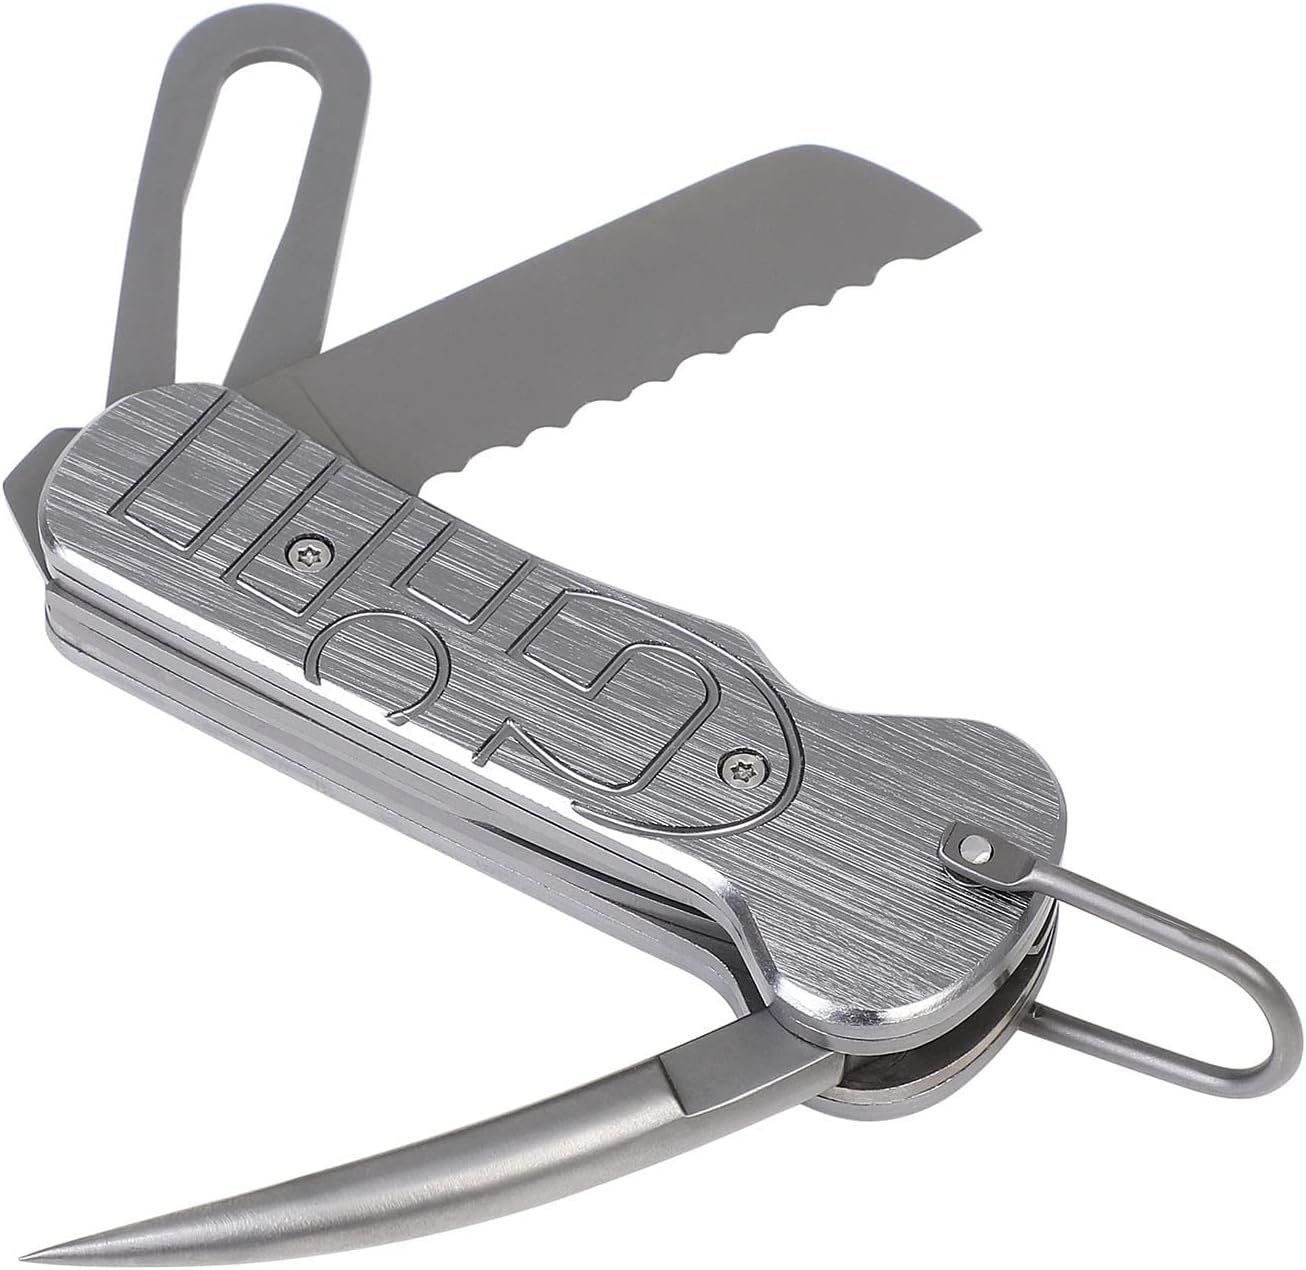 Read more about the article Marlin Spike Rigging Knife Review